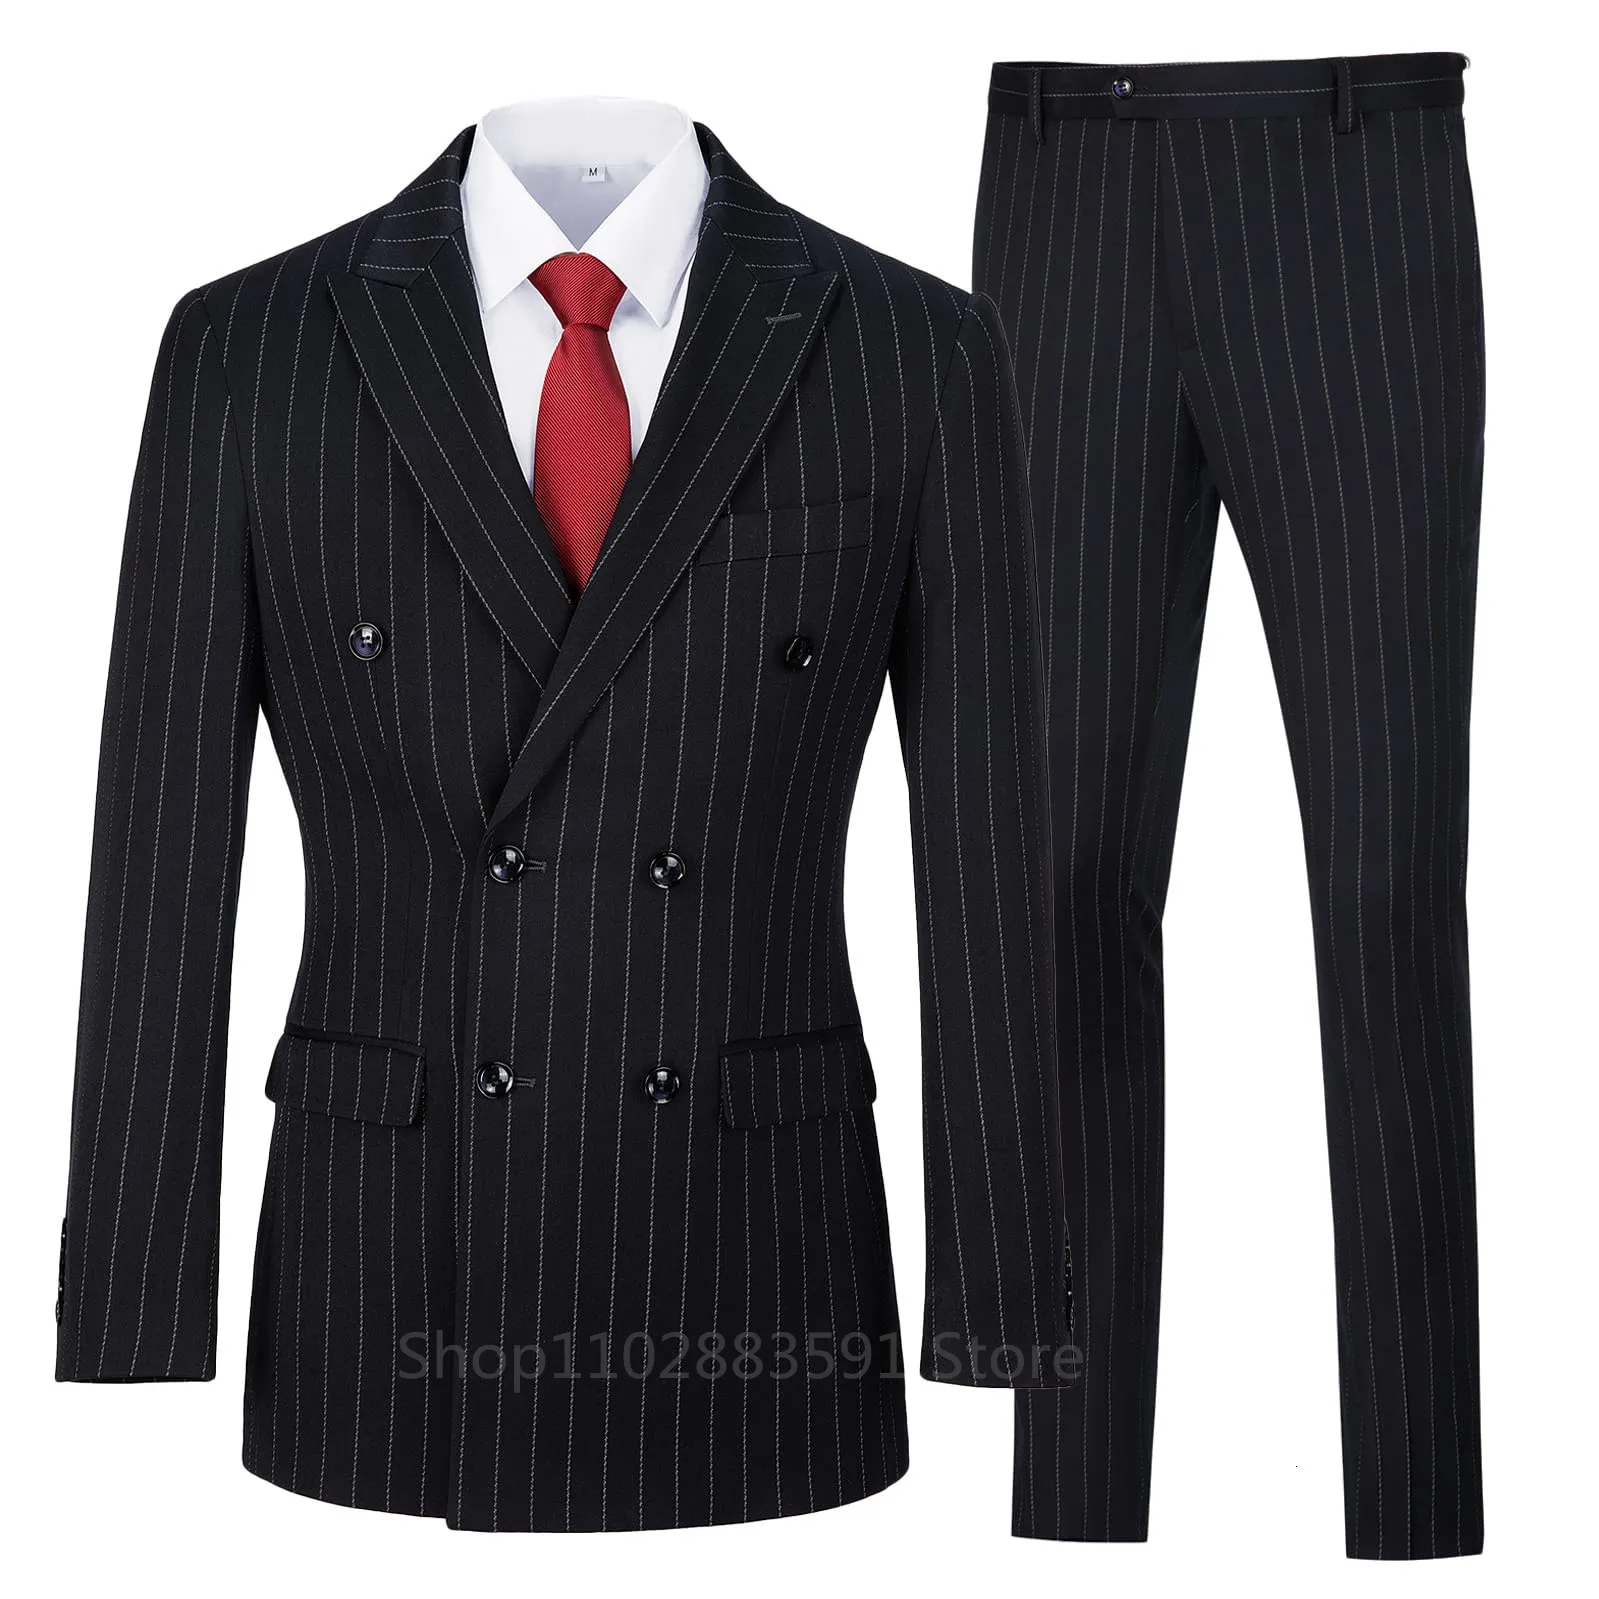 Men s Suits Blazers Slim Fit 3 Piece Double Breasted Black Pinstripe Tuxedo Suit Set for Wedding Prom 230921